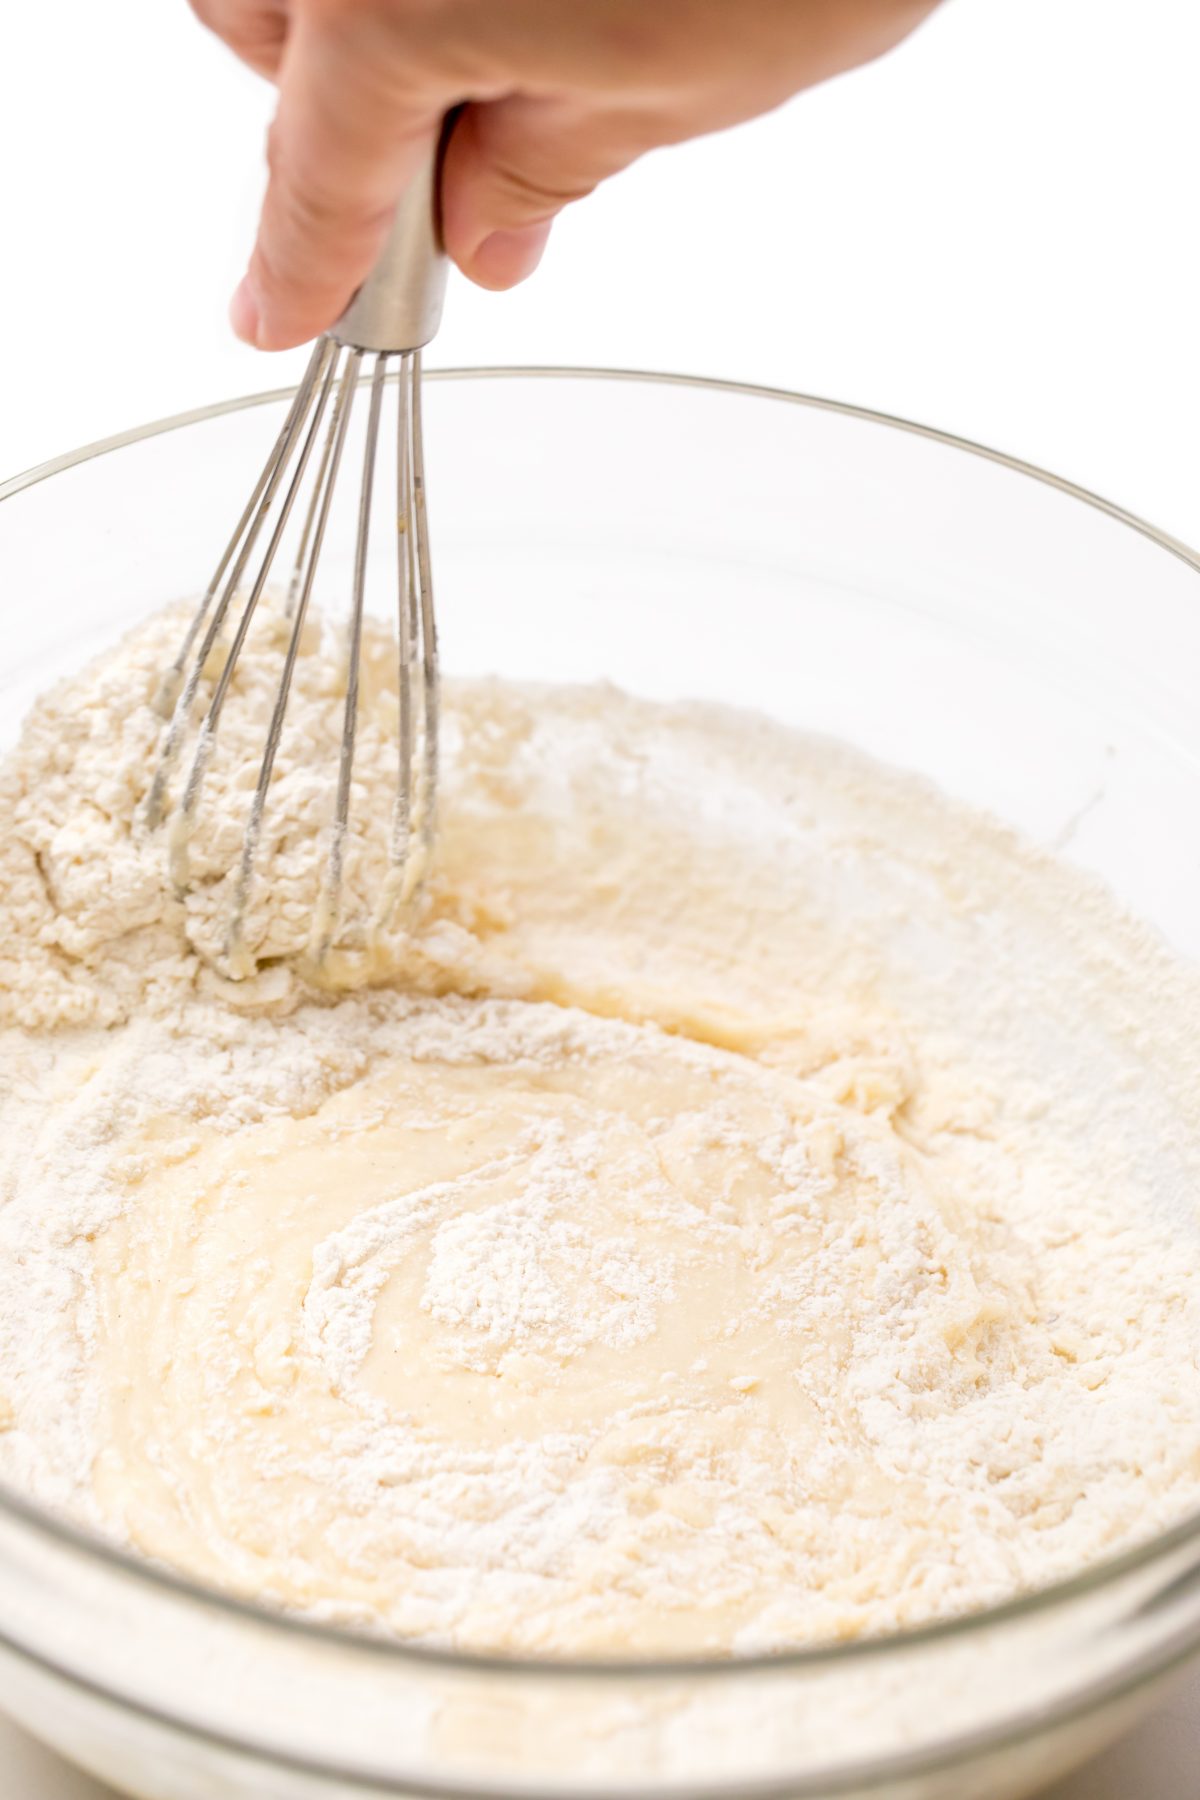 Whisk together dry ingredients and wet ingredients